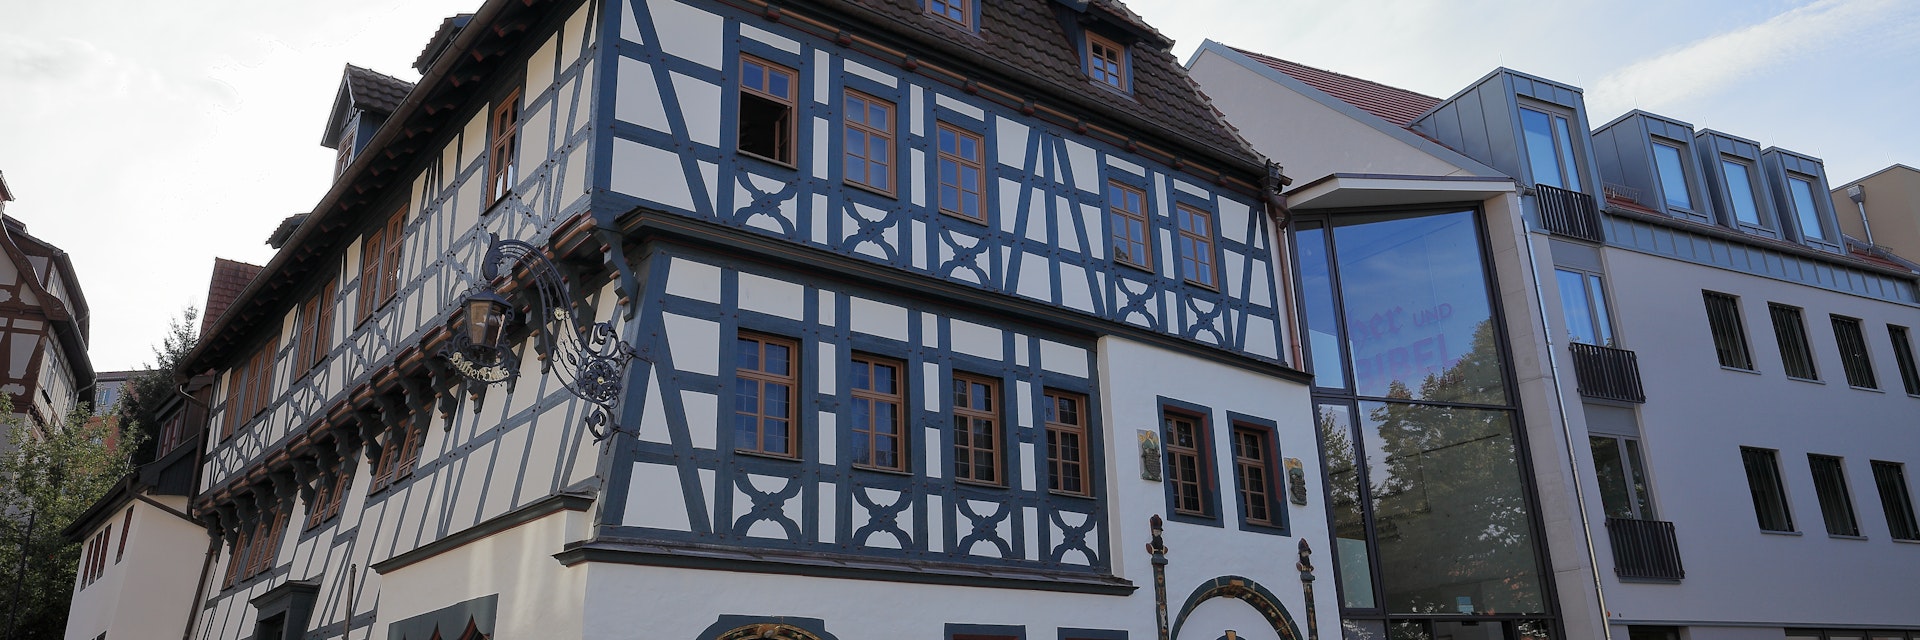 The historic Martin Luther House in Eisenach.